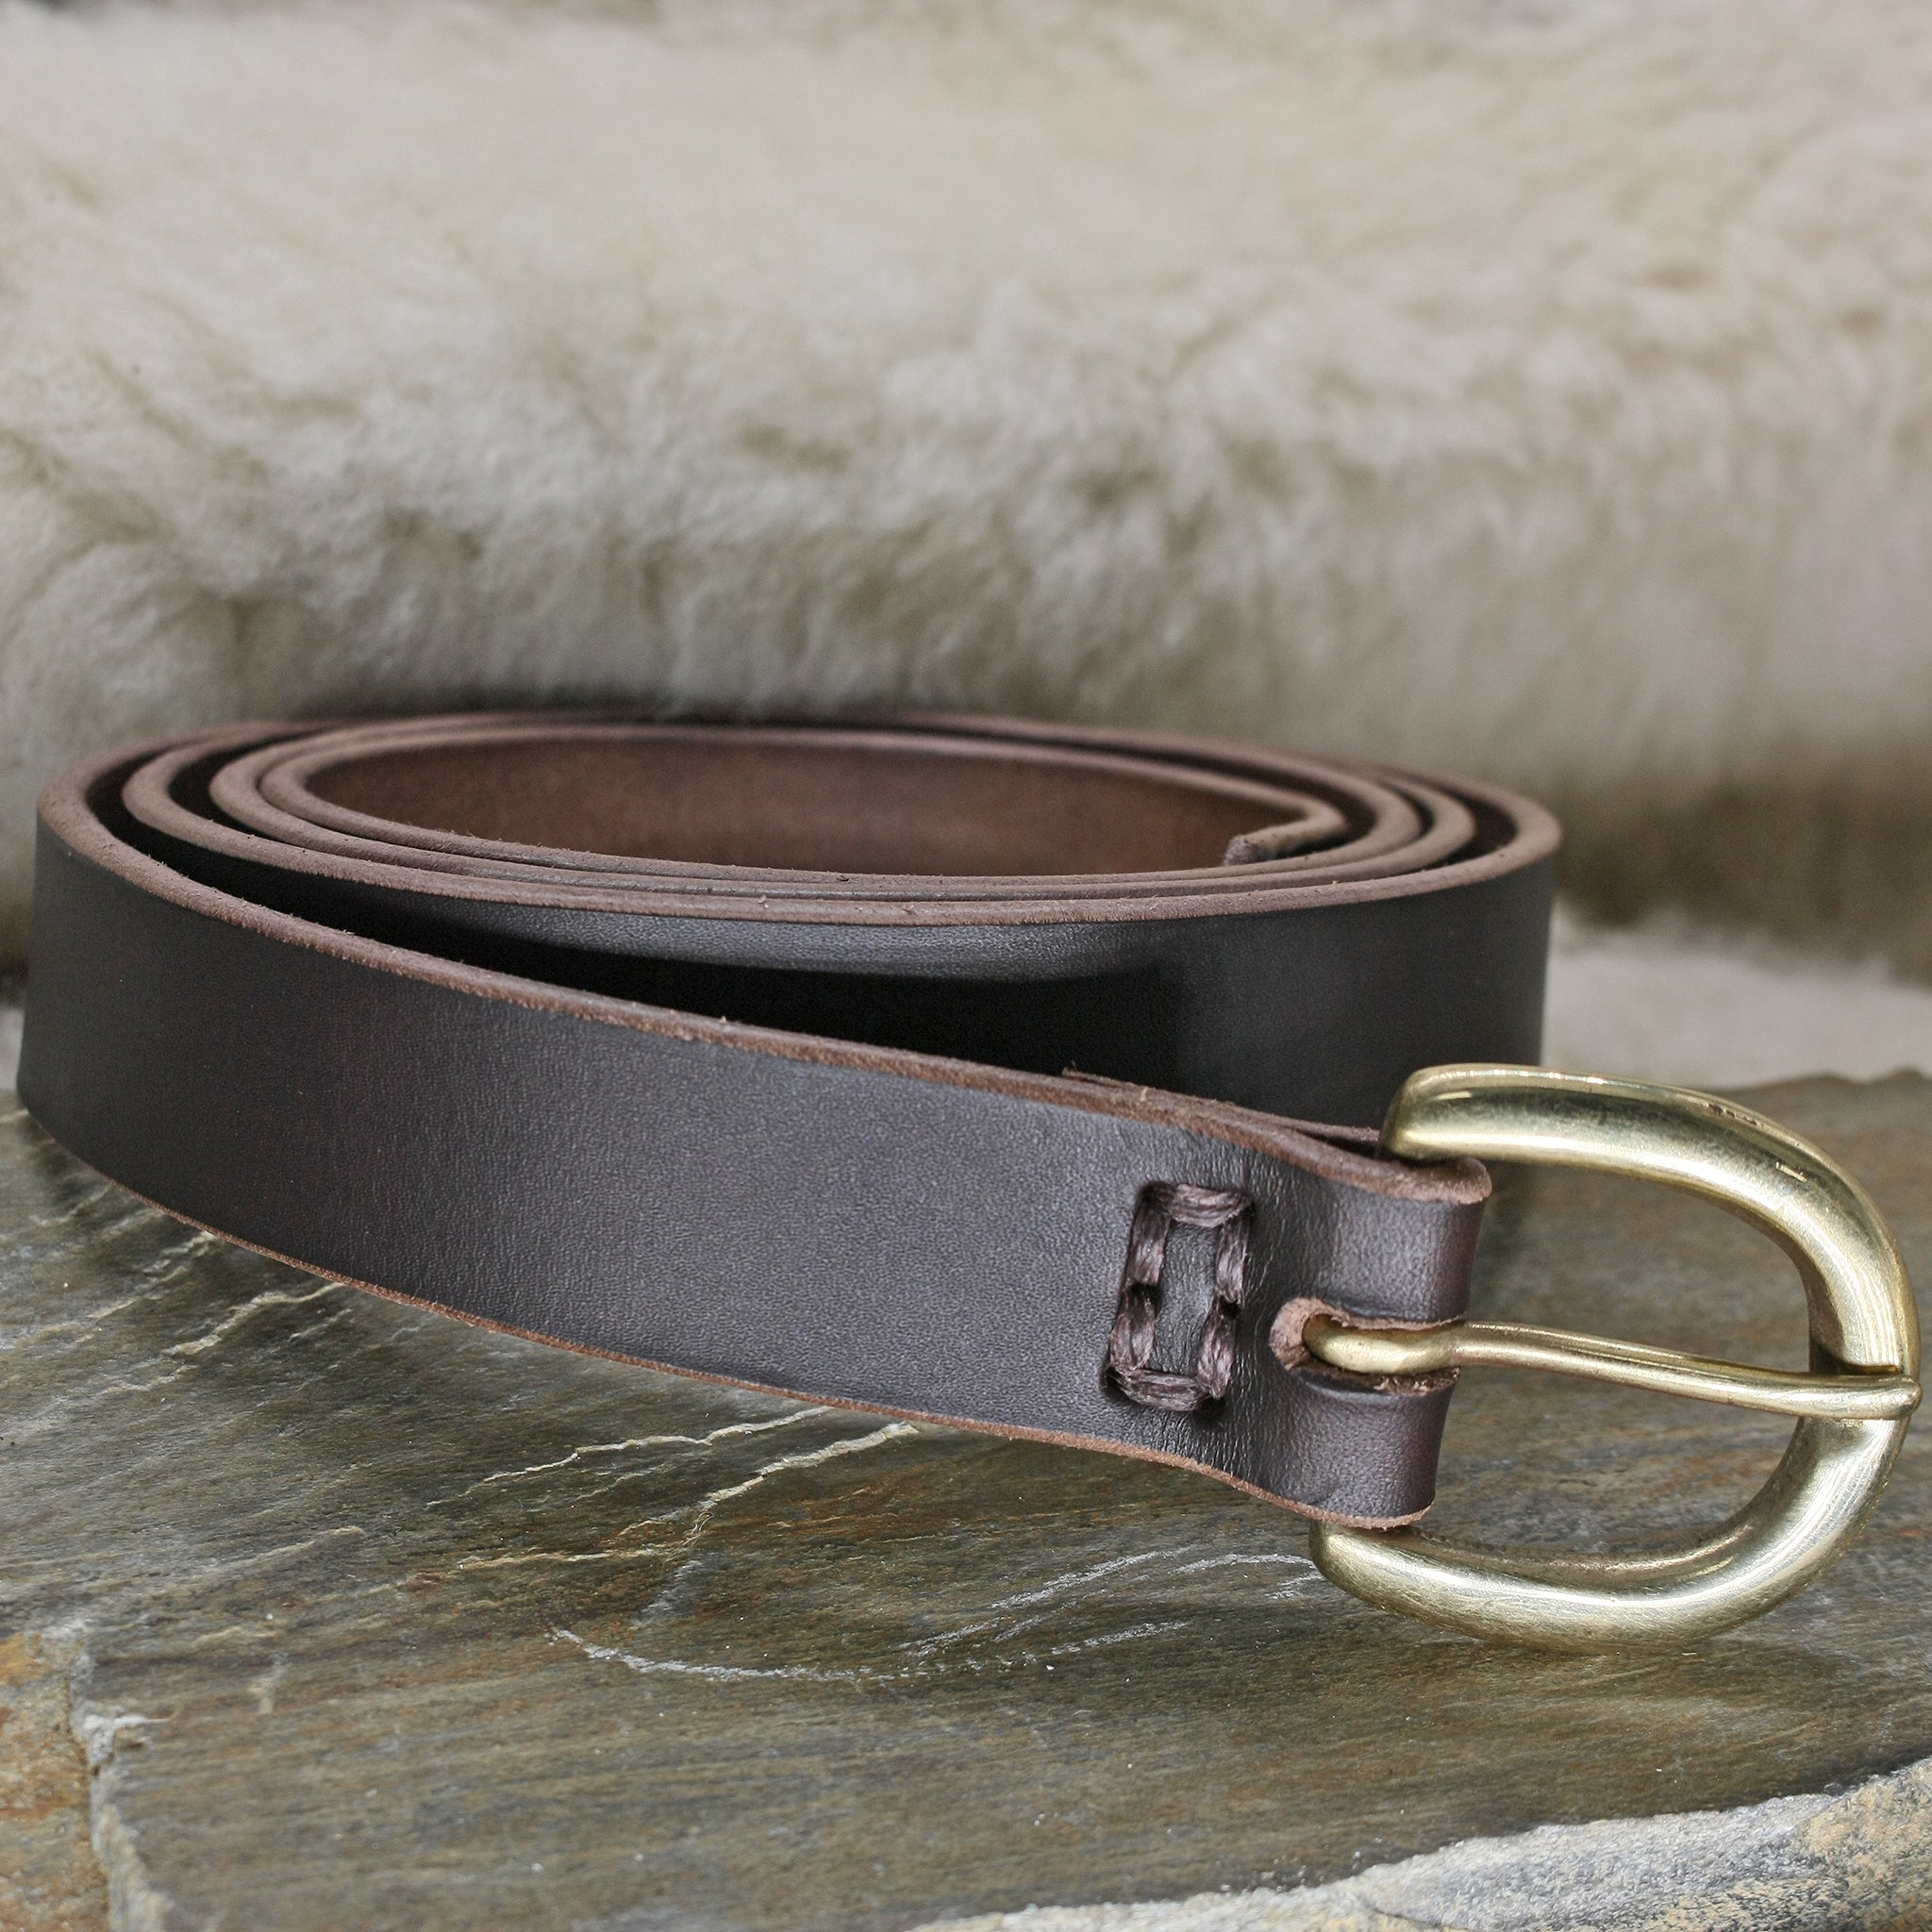 1 inch / 25mm Wide Brown Leather Viking Belt with Brass Buckle